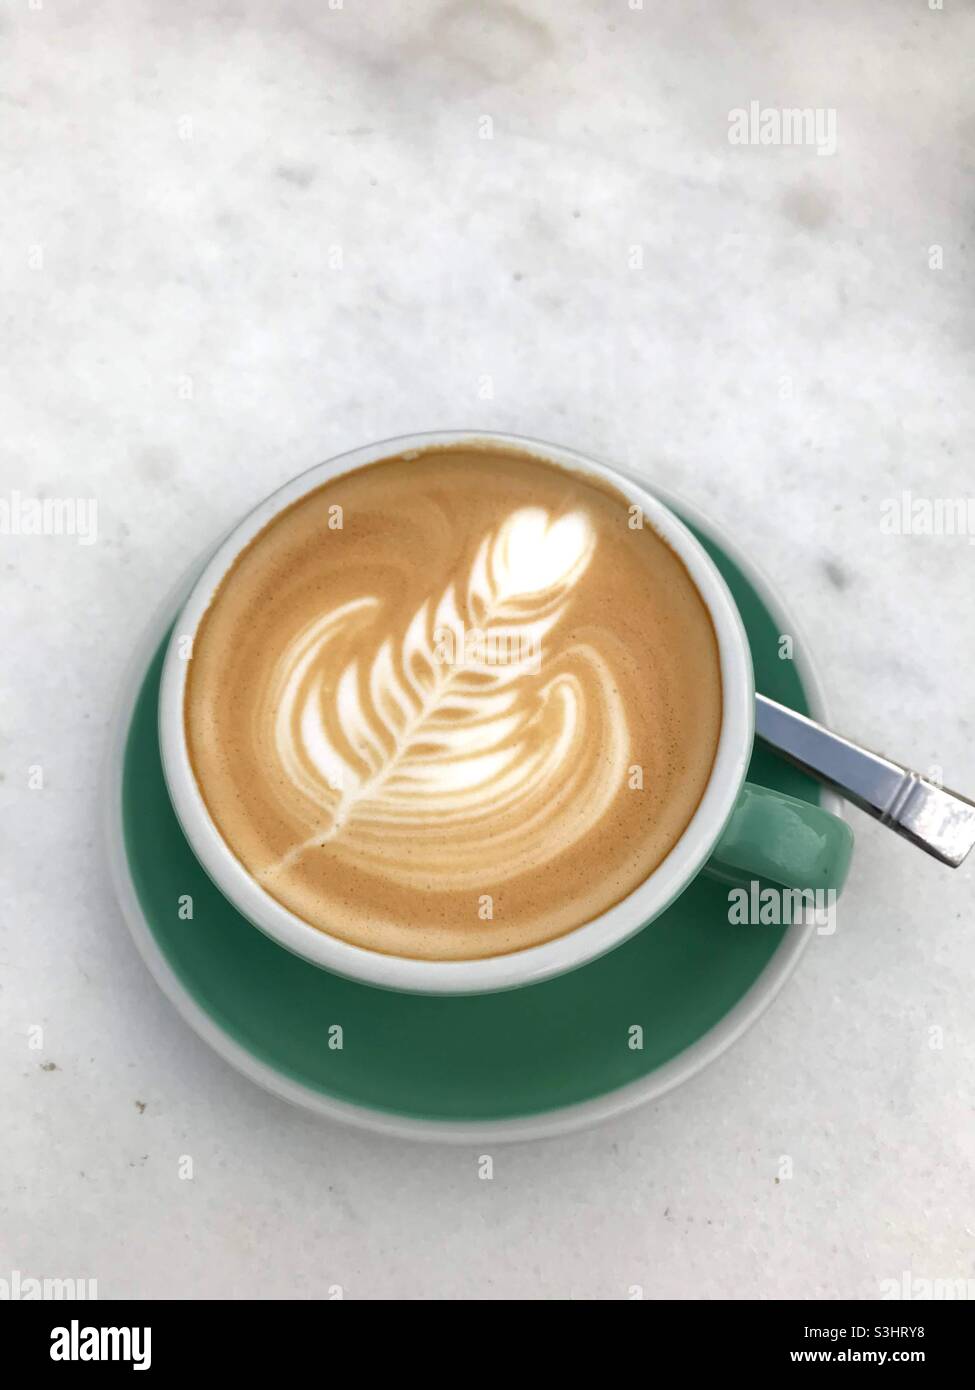 Coffee cappuccino in green cup Stock Photo